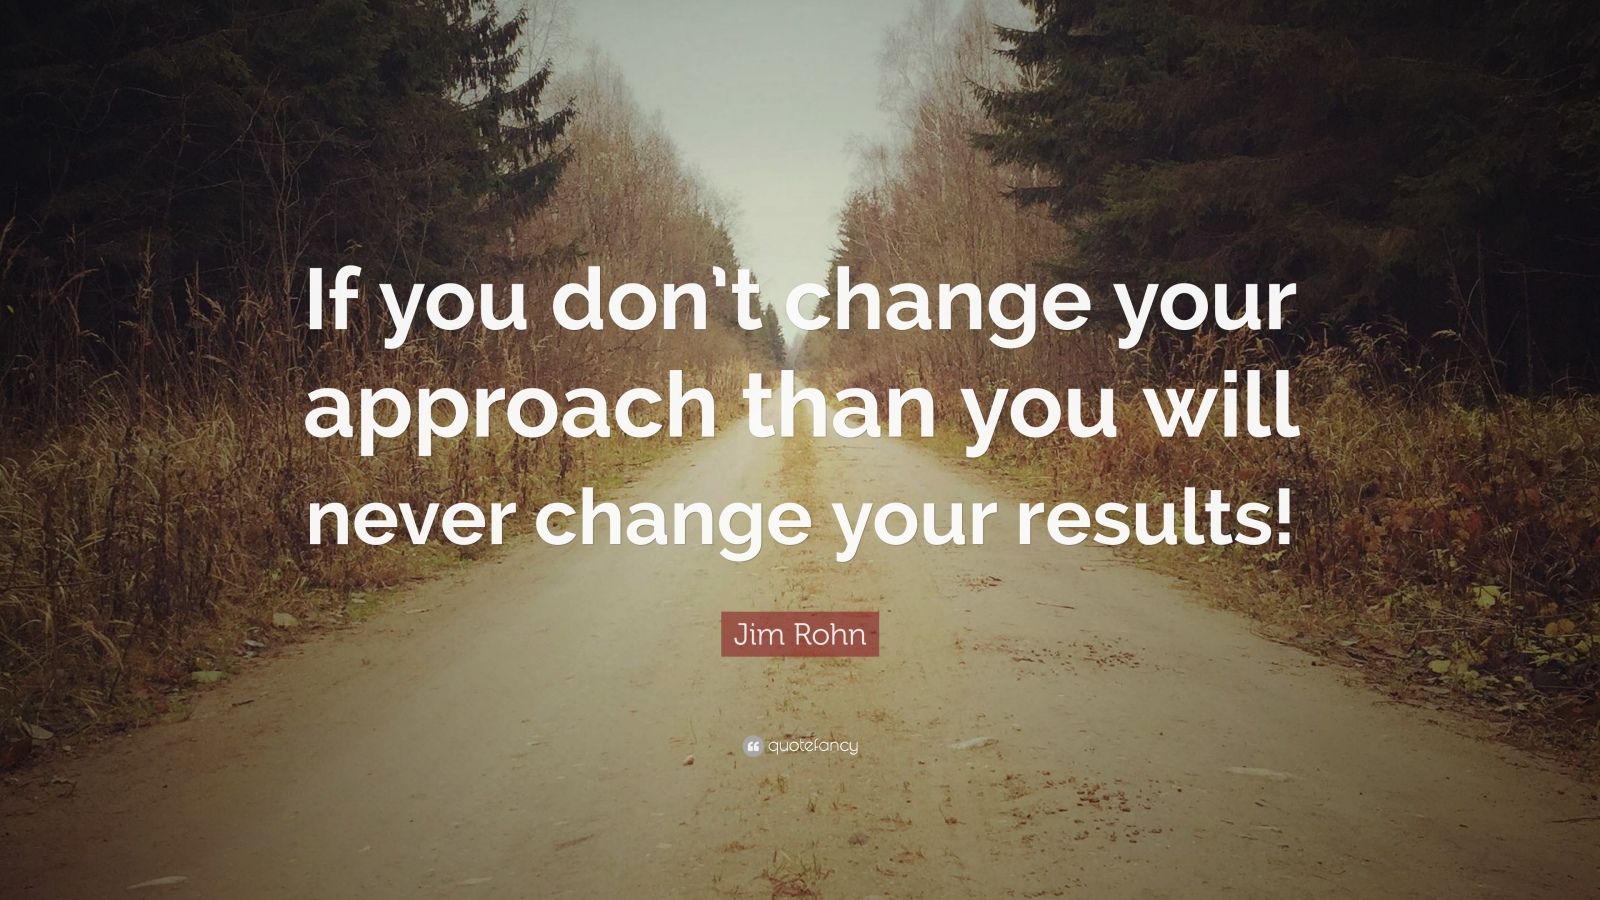 Jim Rohn Quote: “If you don’t change your approach than you will never